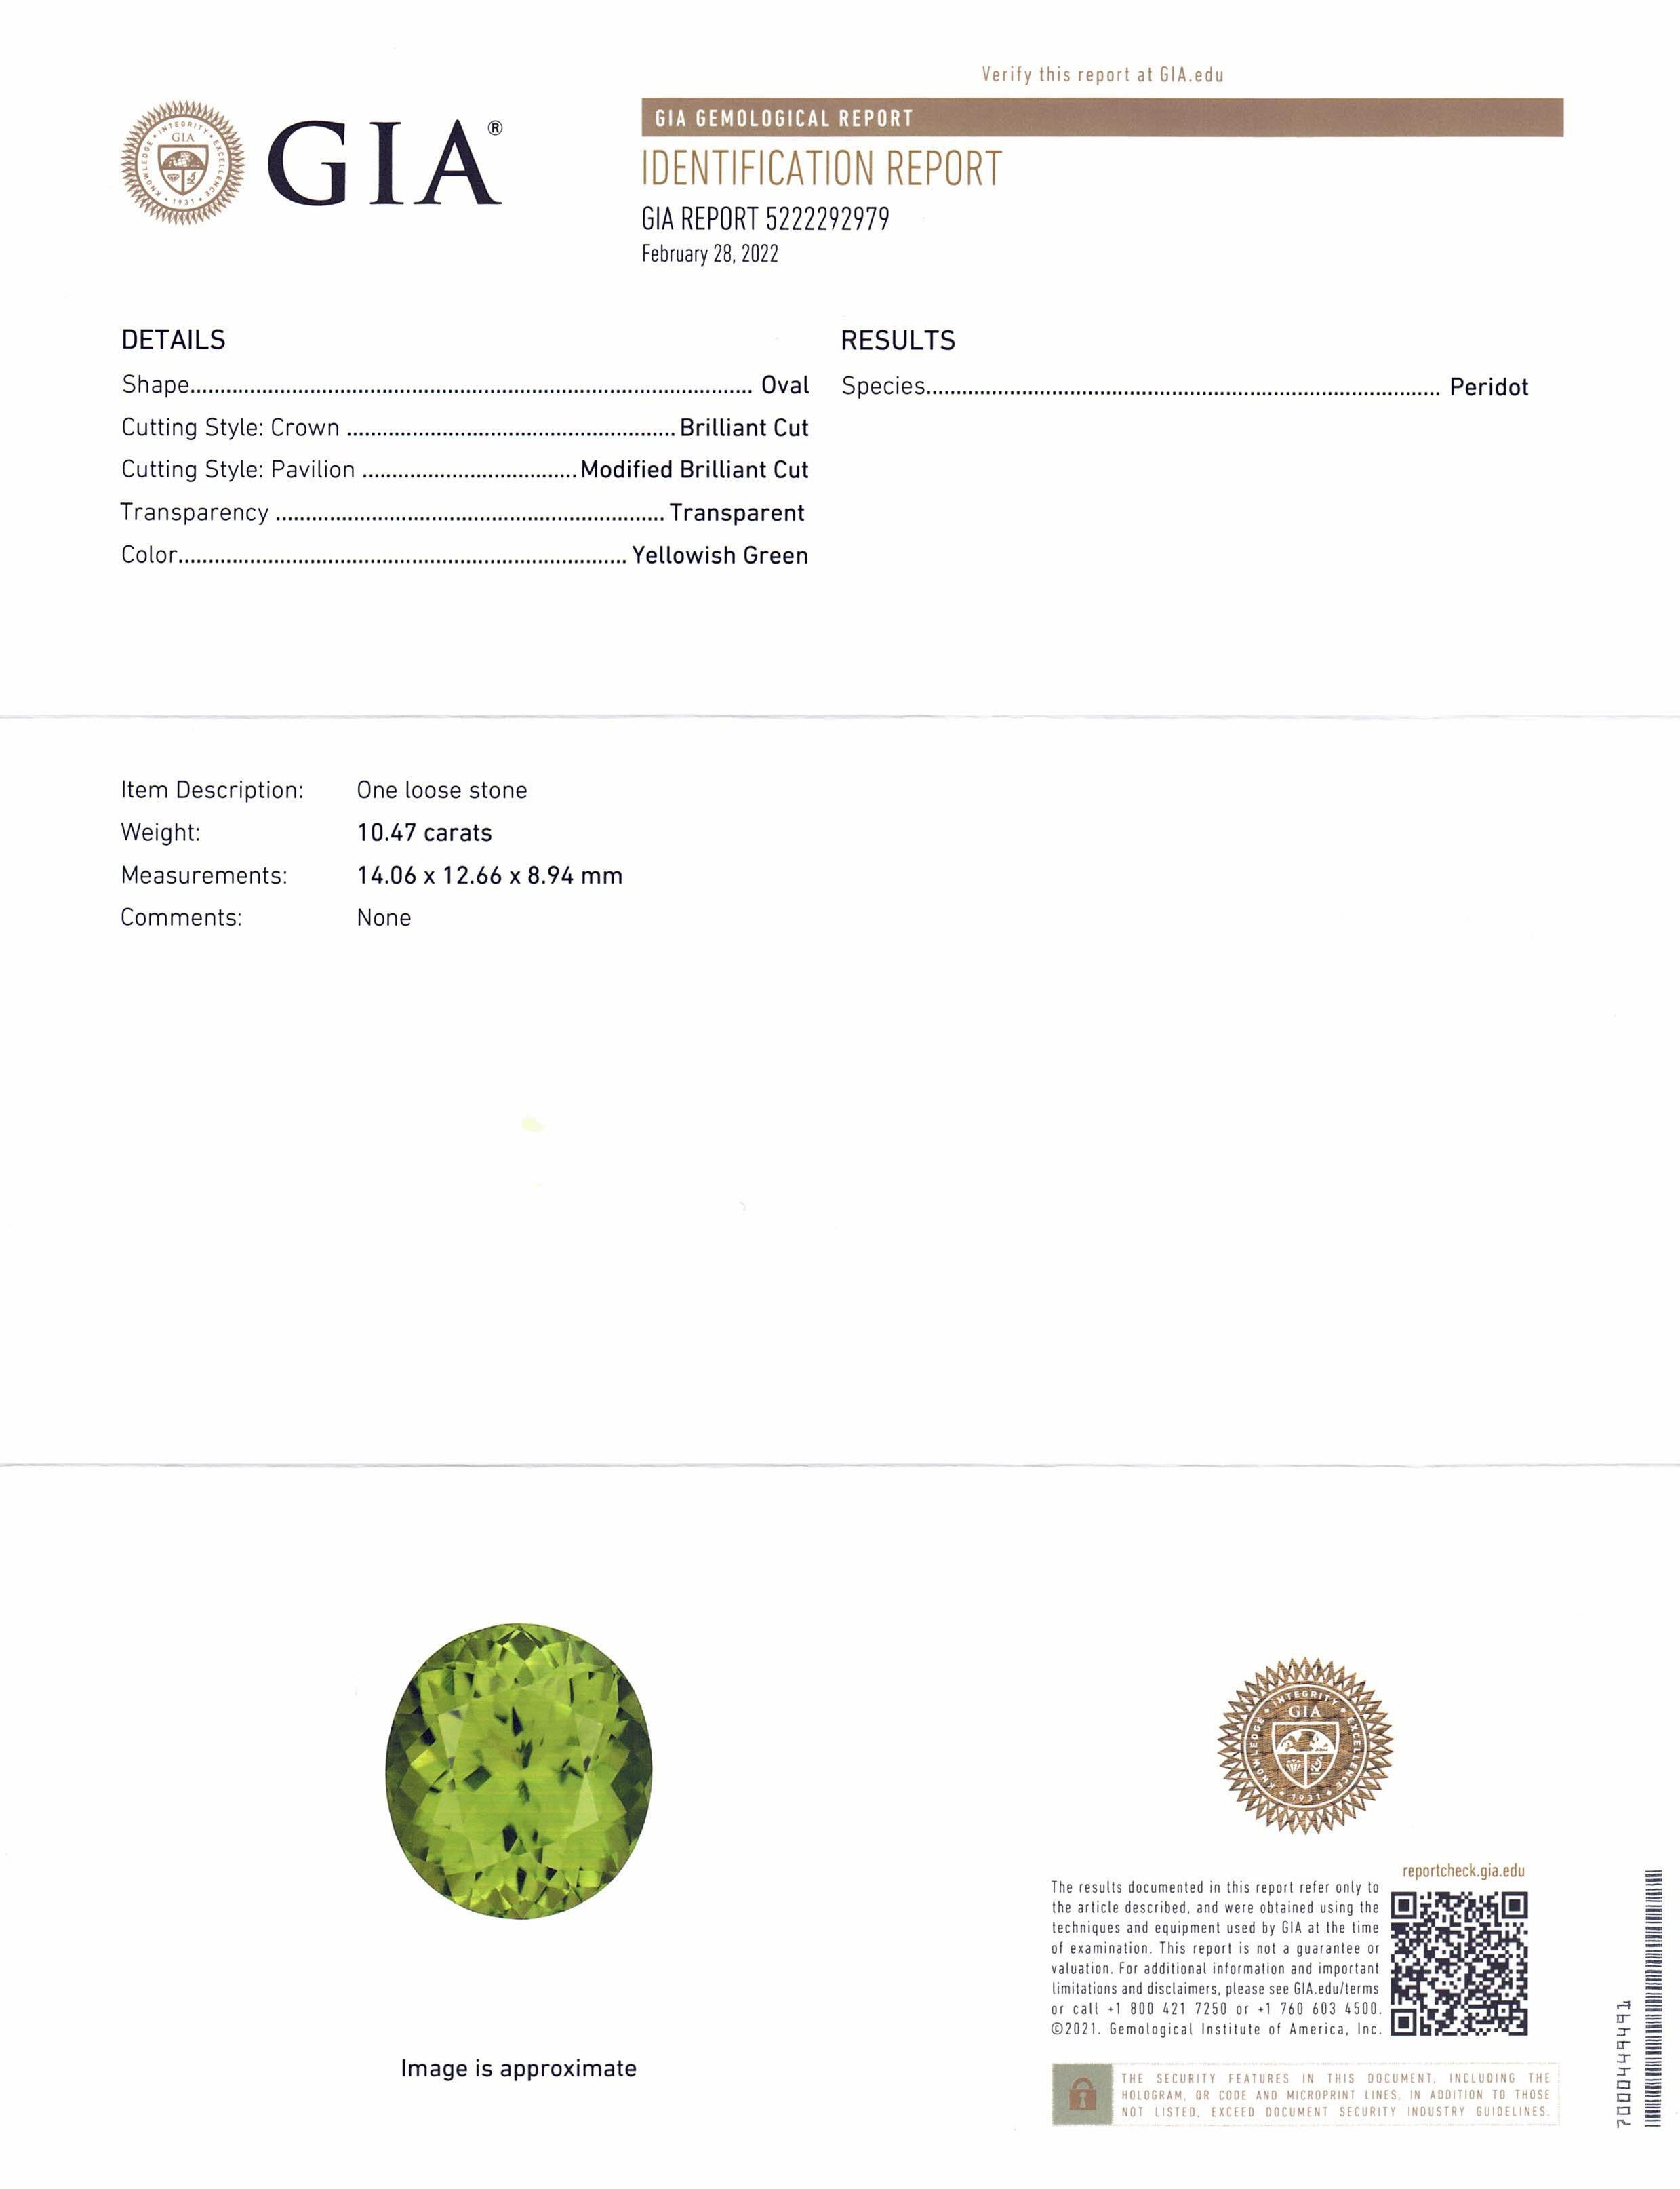 This is a stunning GIA Certified Peridot 

The GIA report reads as follows:

GIA Report Number: 5222292979
Shape: Oval
Cutting Style: 
Cutting Style: Crown: Brilliant Cut
Cutting Style: Pavilion: Modified Brilliant Cut
Transparency: